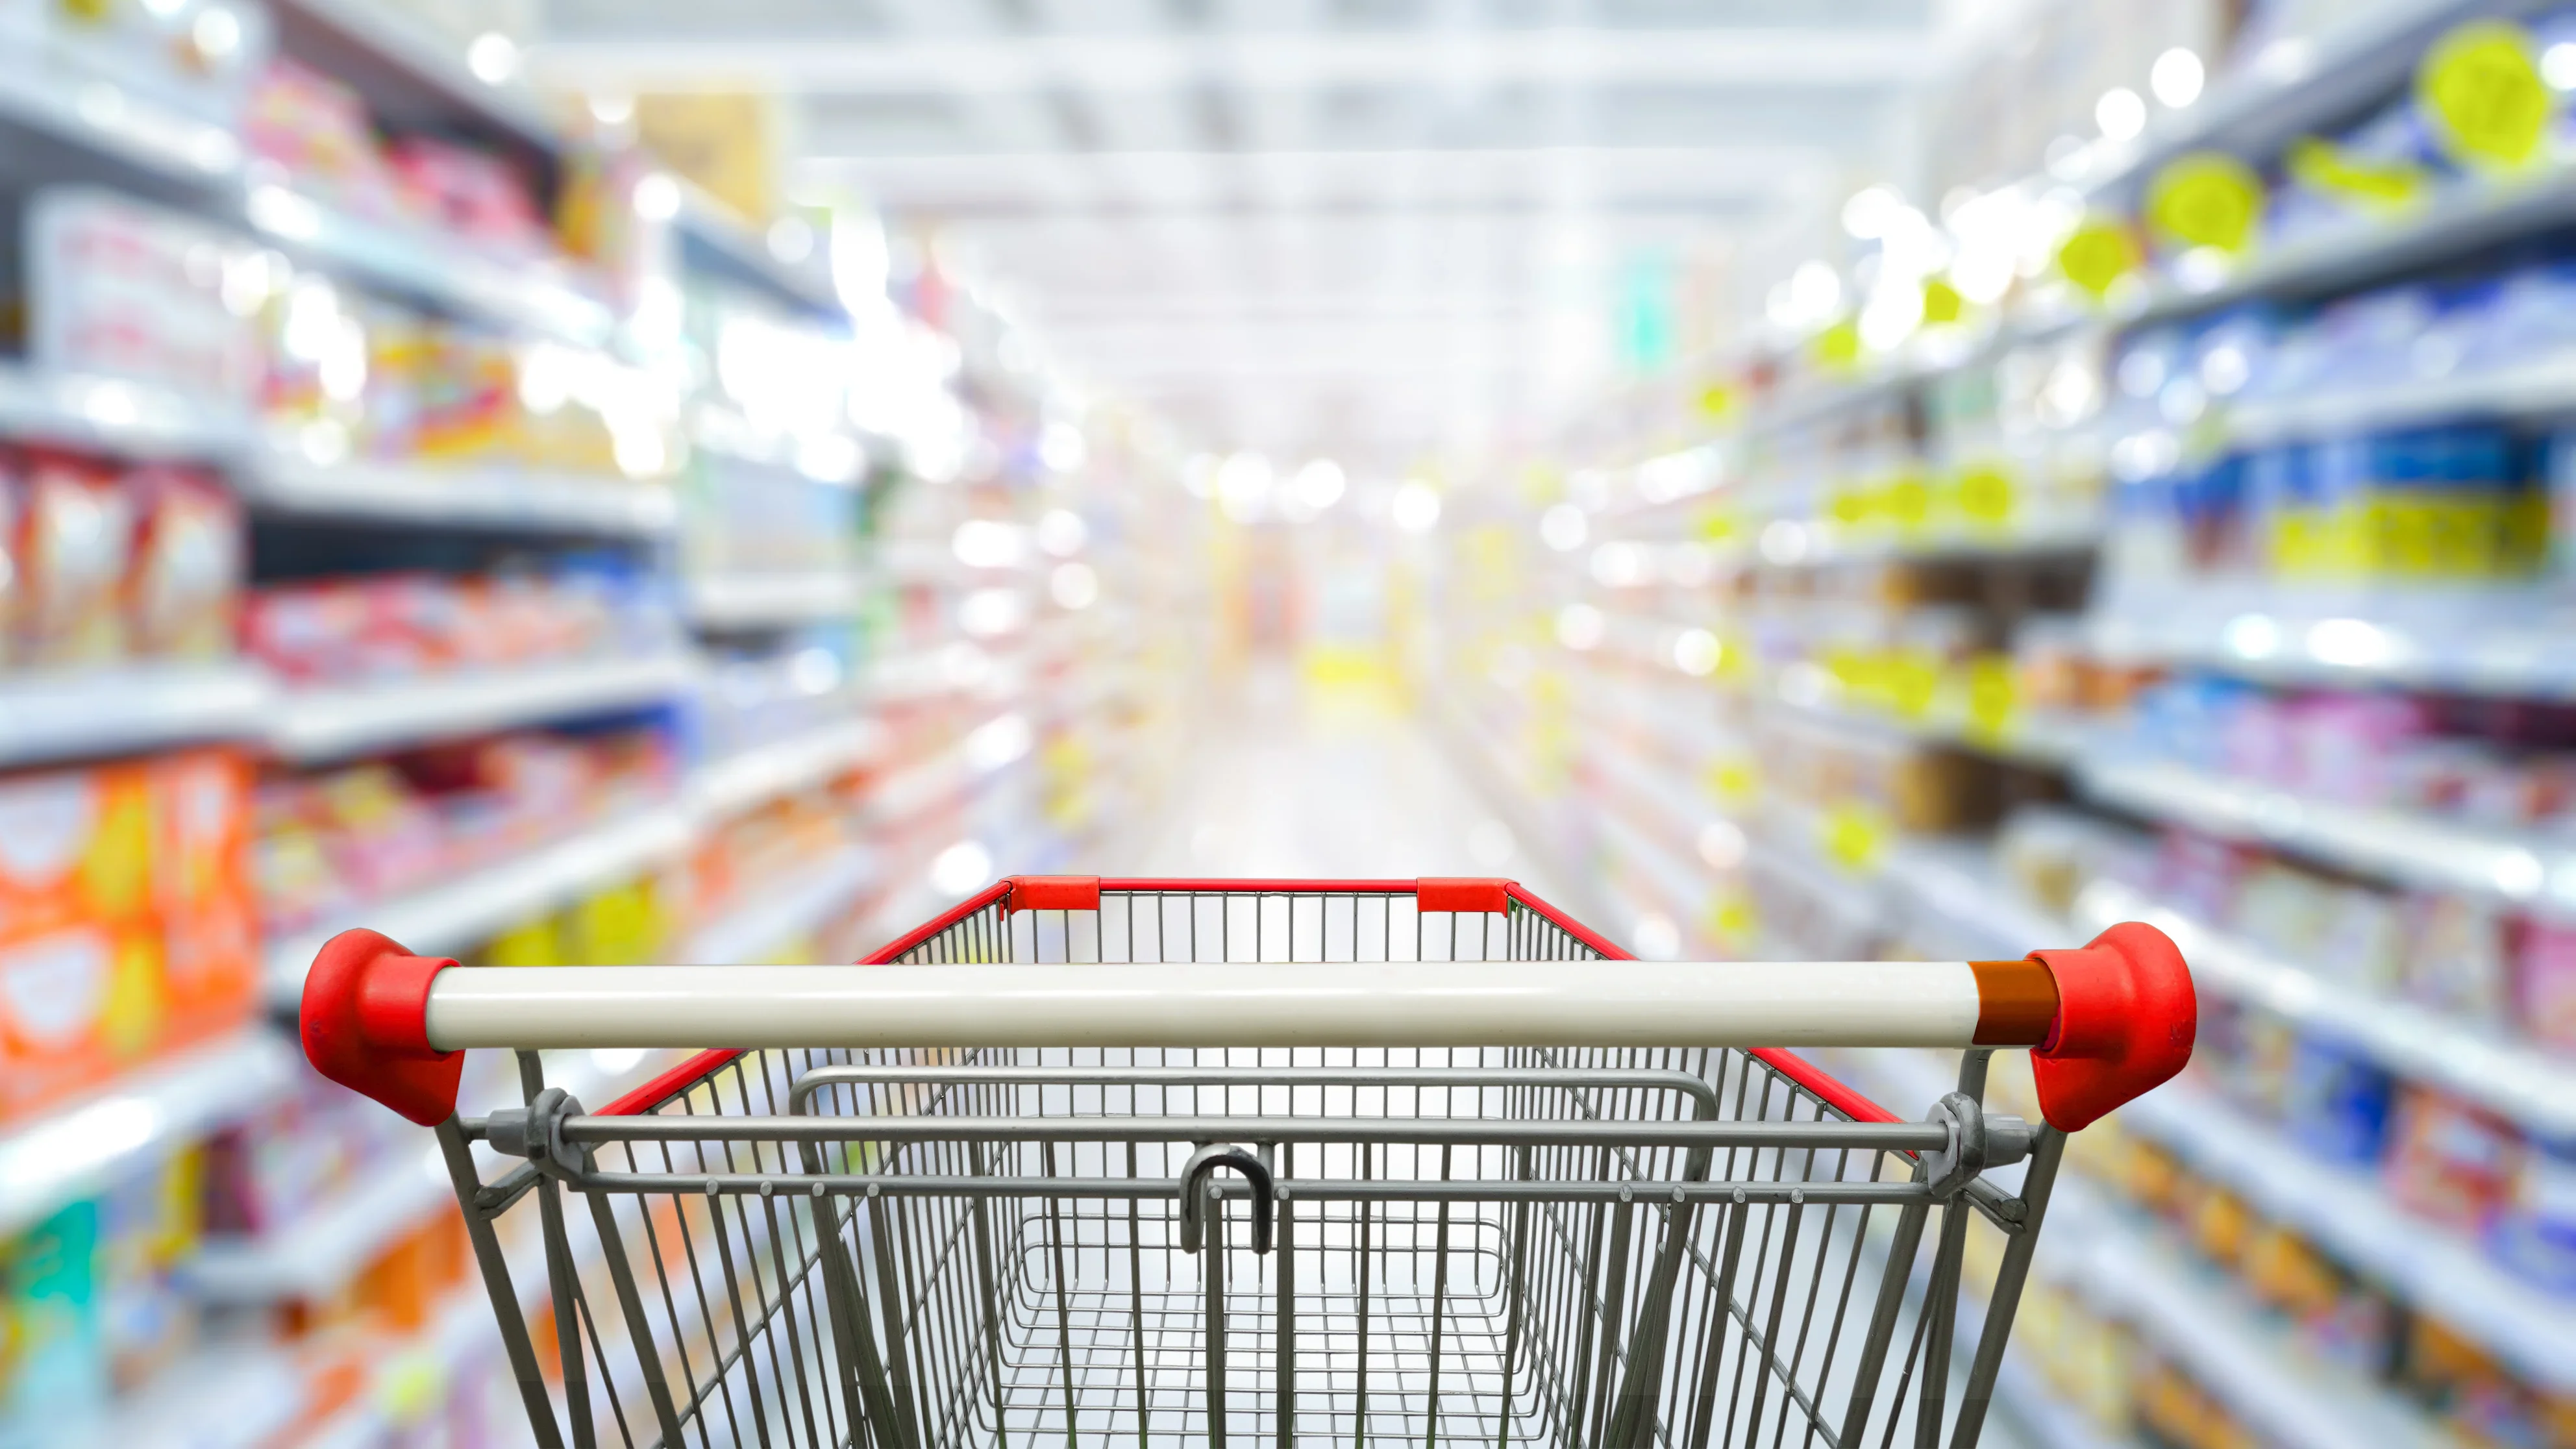 Why Are Foodservice Wholesalers Turning to the Marketplace Model?